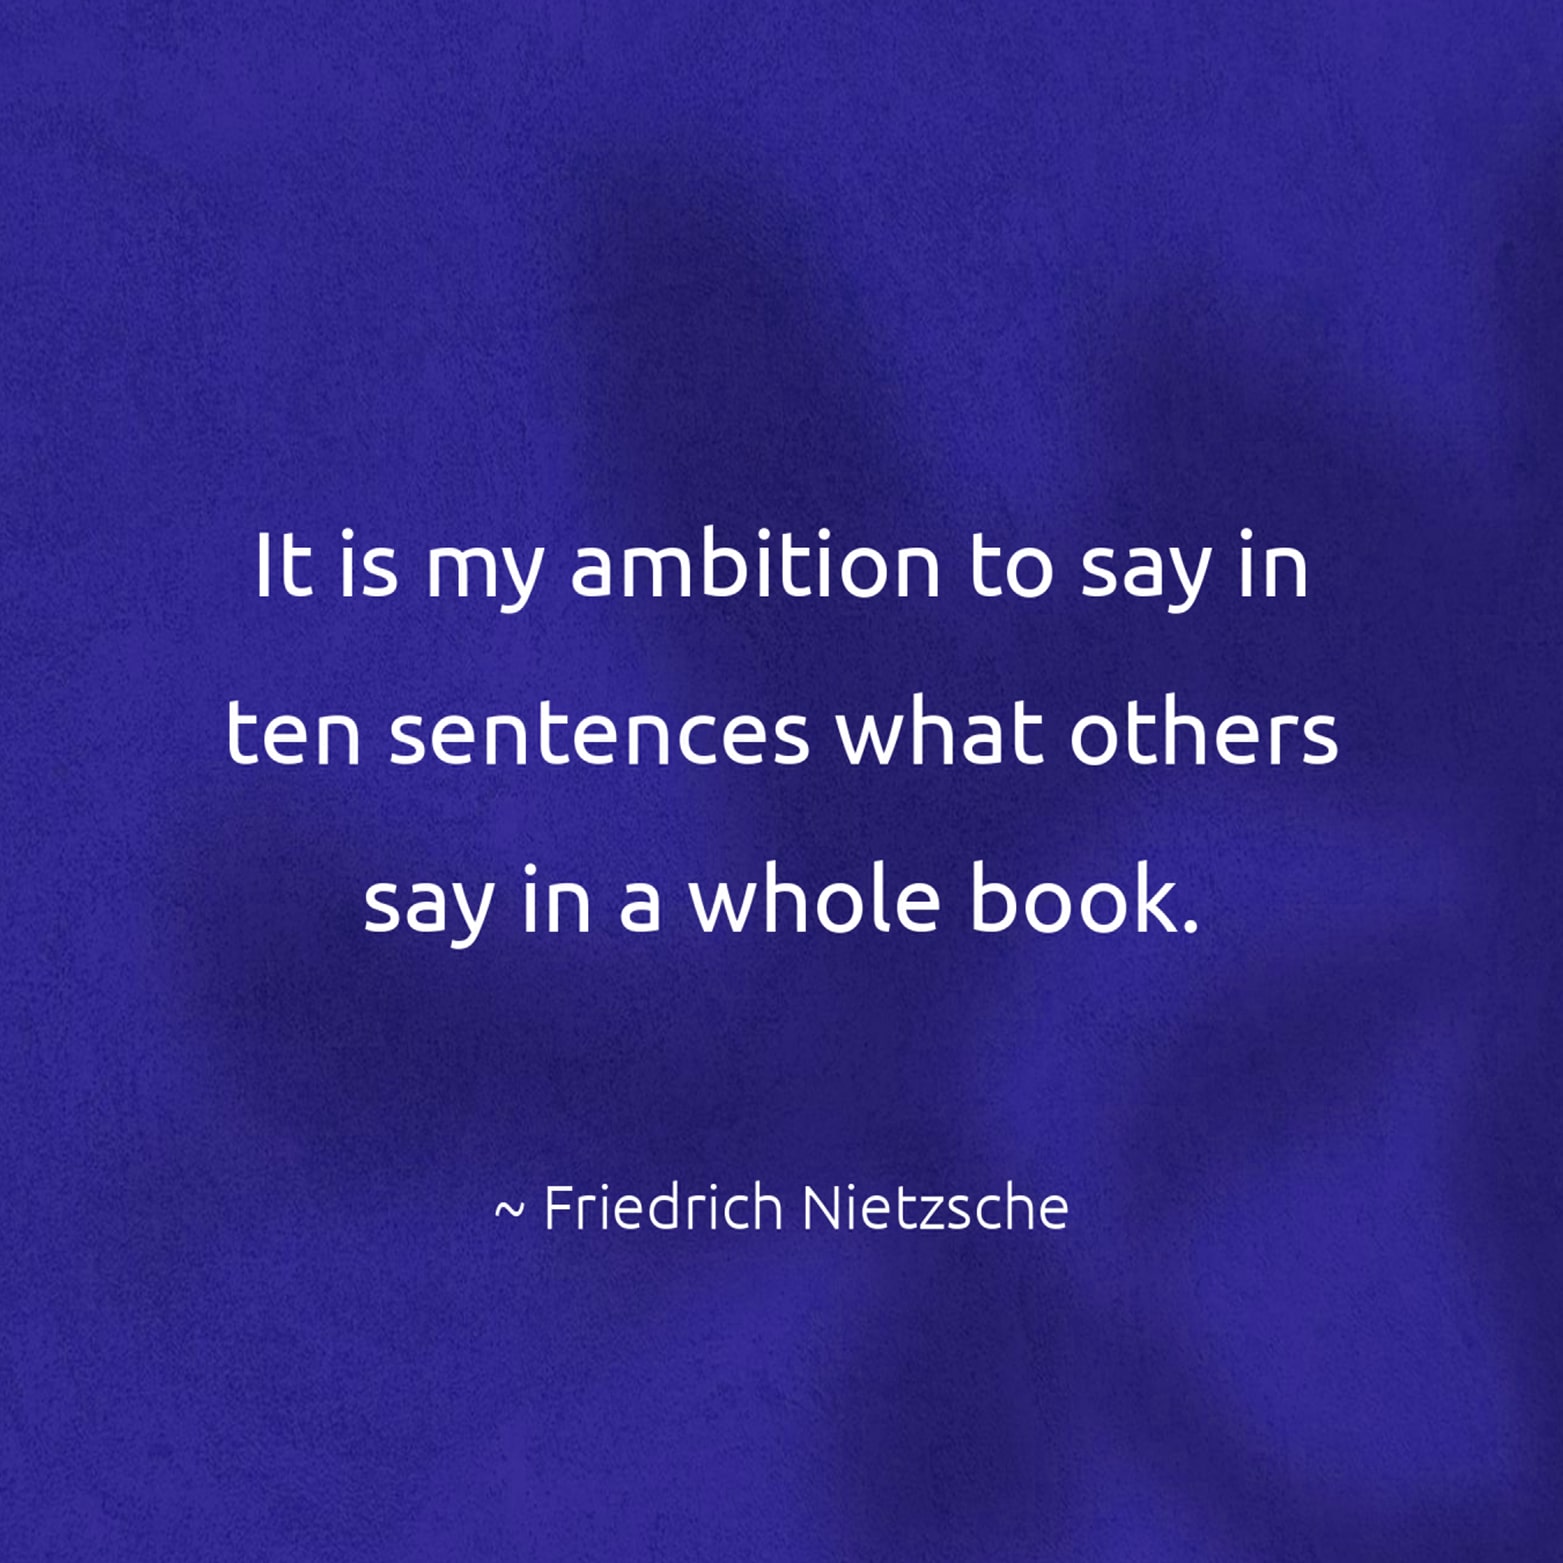 It is my ambition to say in ten sentences what others say in a whole book. - Friedrich Nietzsche